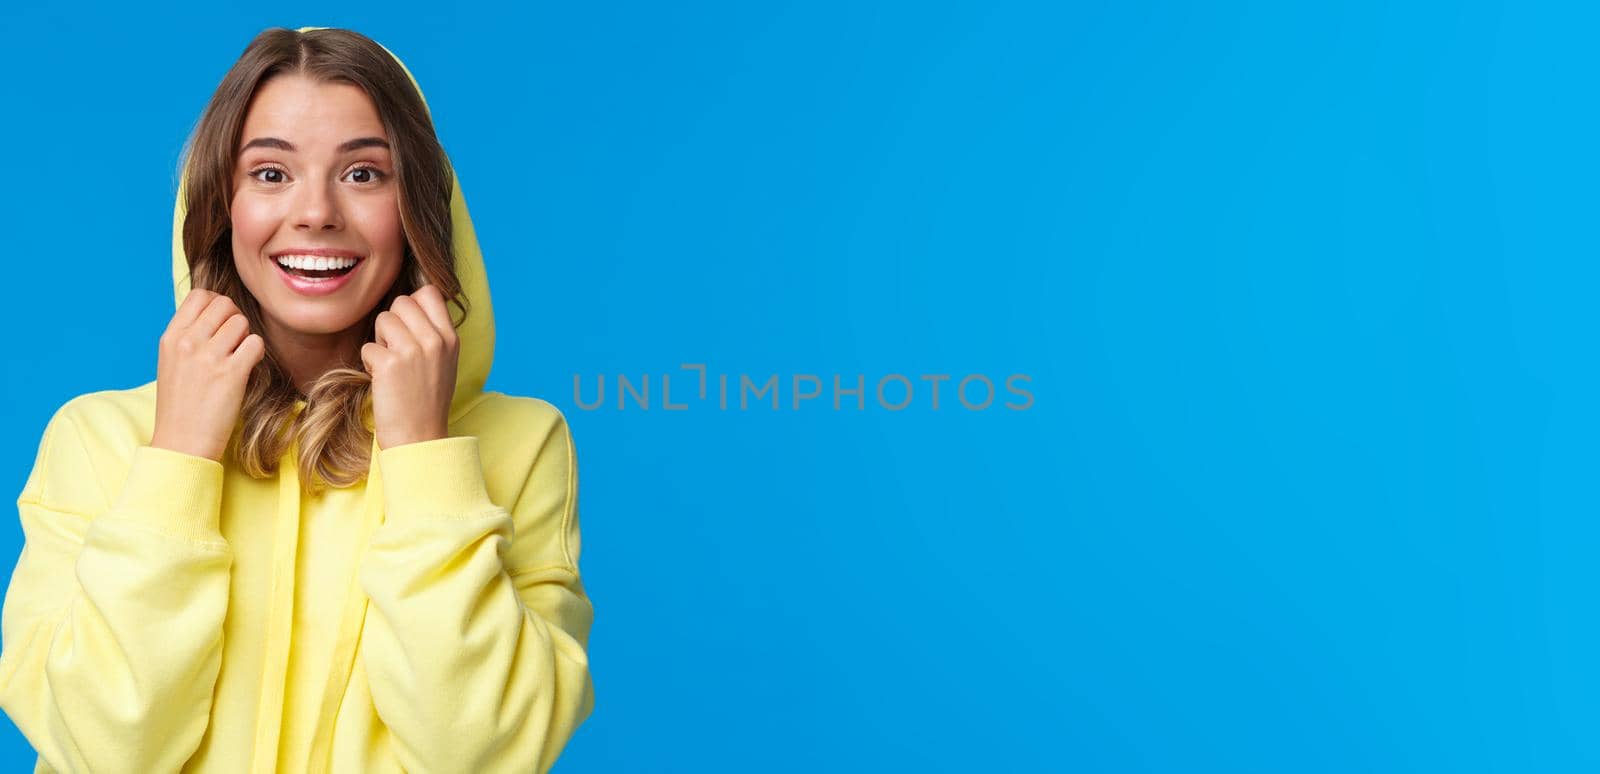 Lifestyle, people and youth concept. Close-up portrait of beautiful smiling blond female put on hoodie, looking camera with upbeat enthusiastic expression, standing blue background.